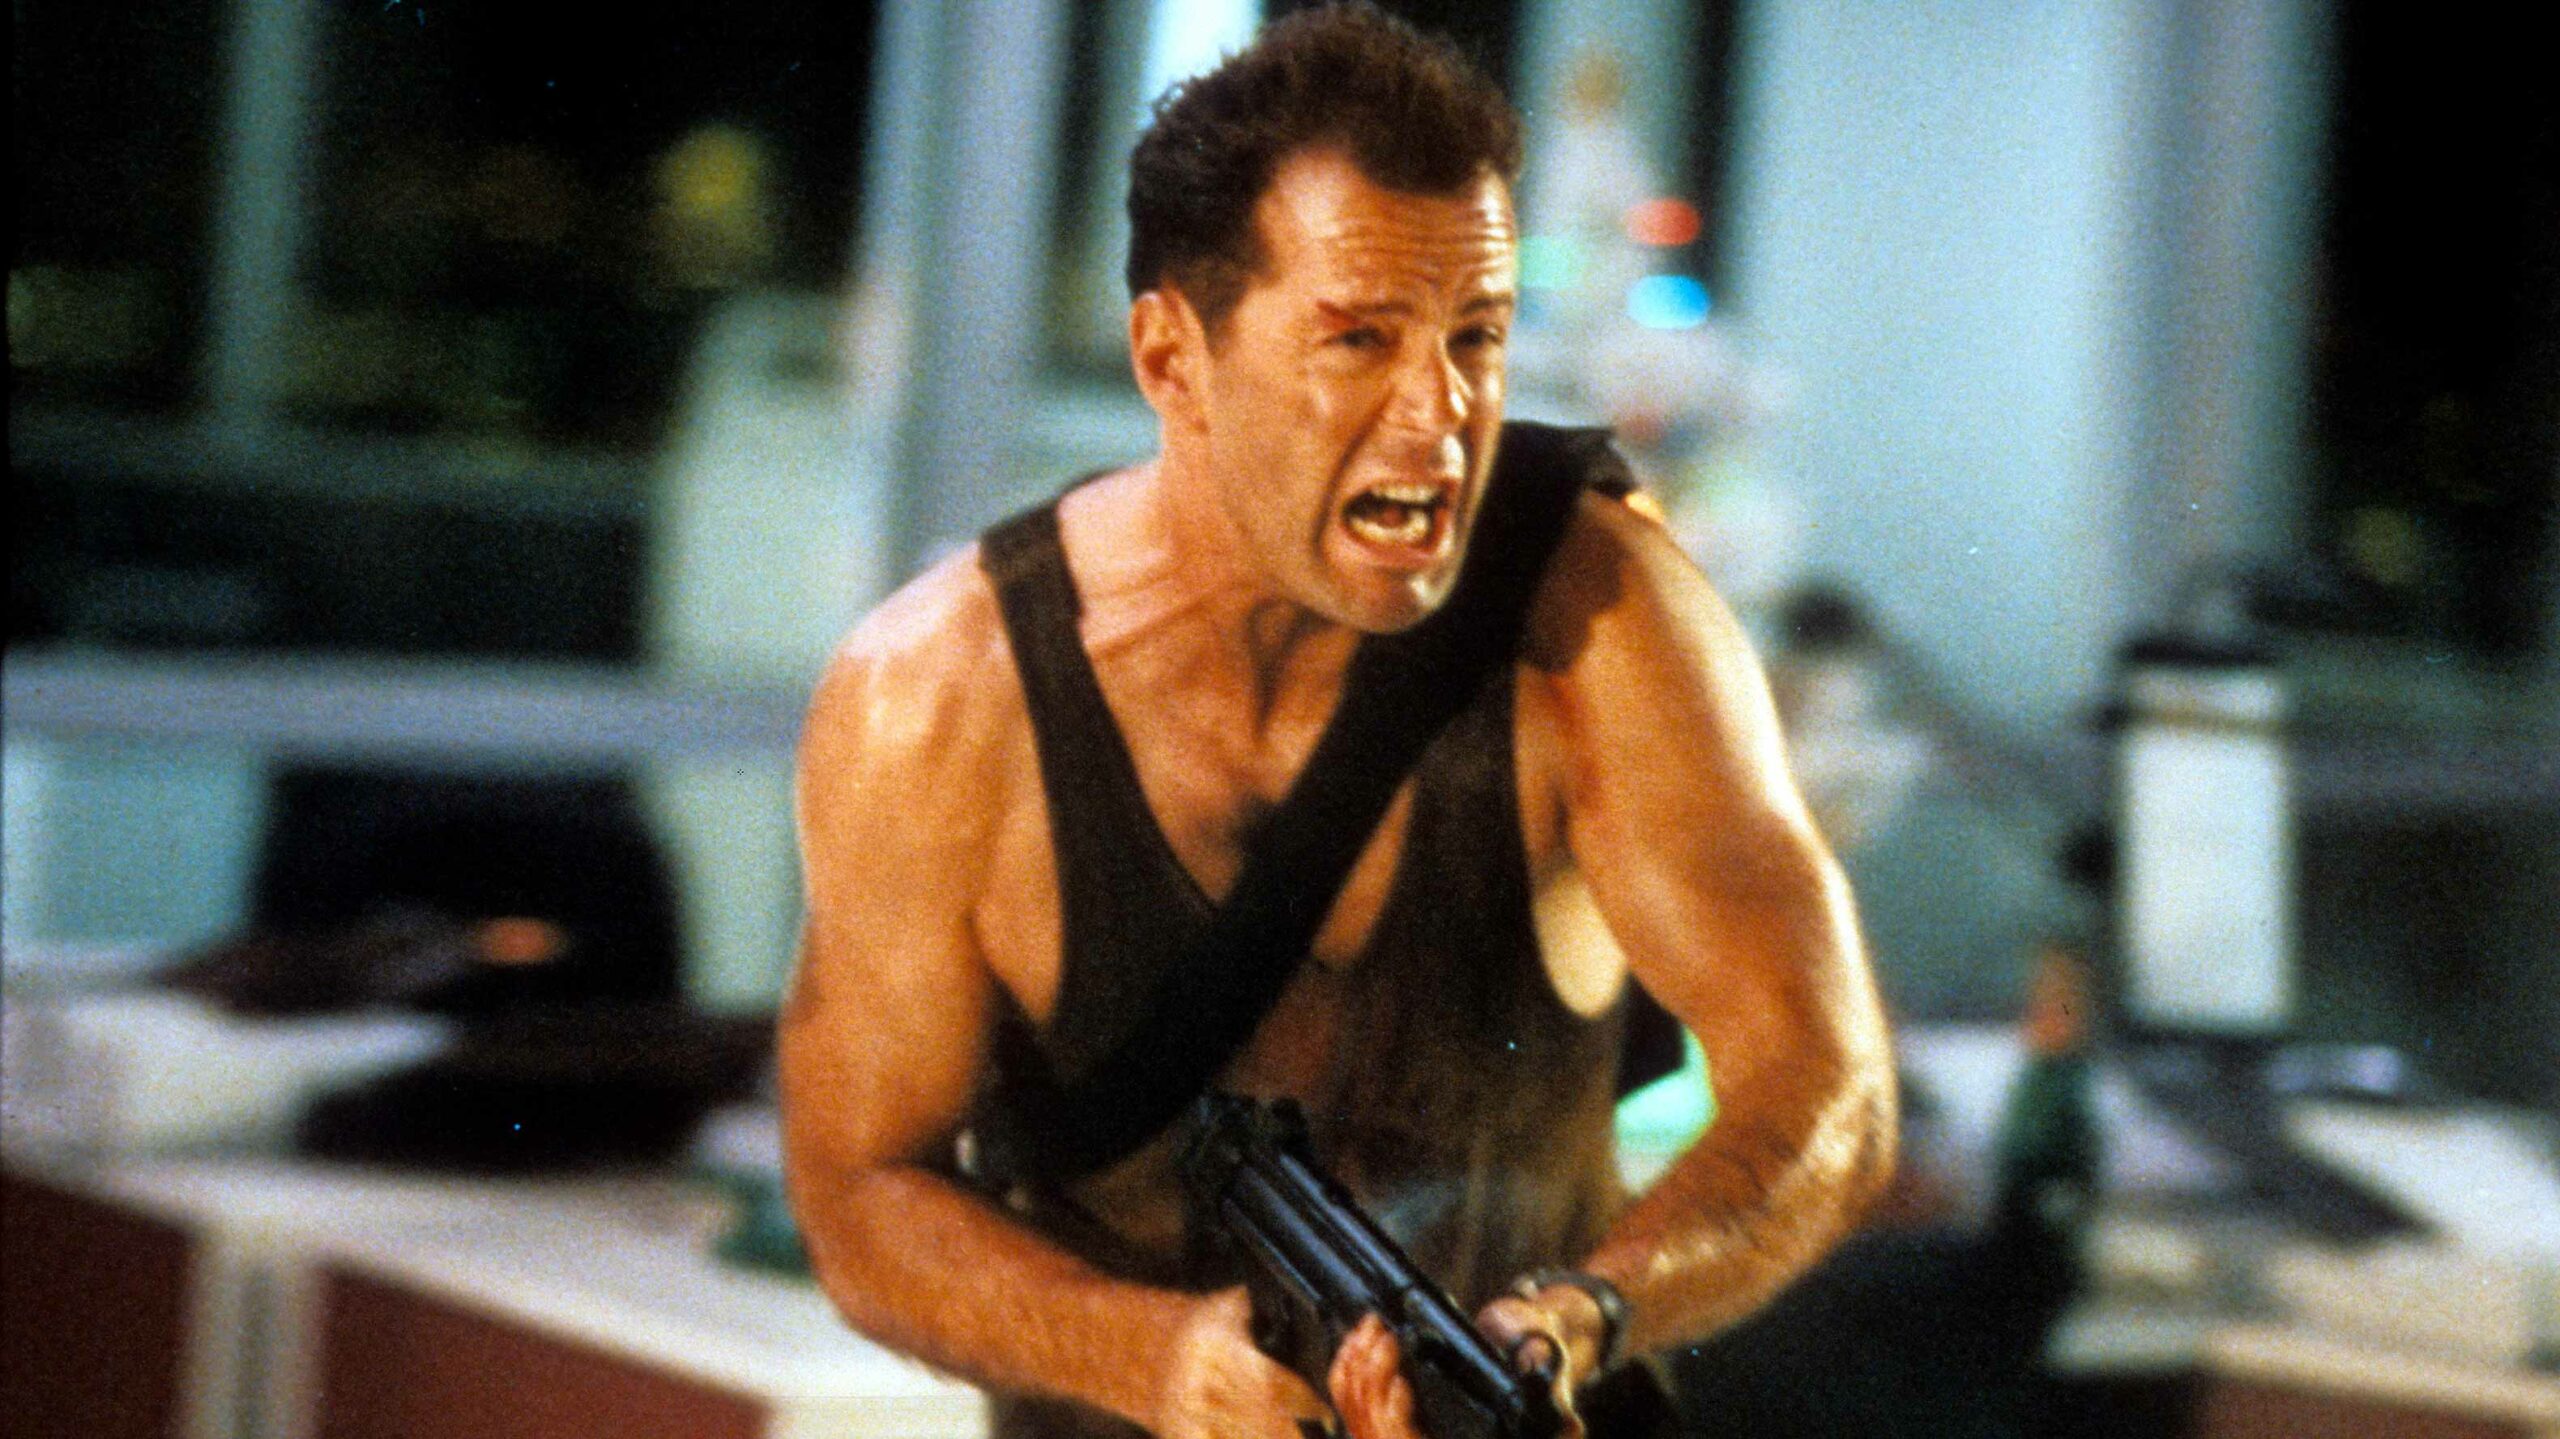 John McClane running and screaming with a gun in Die Hard